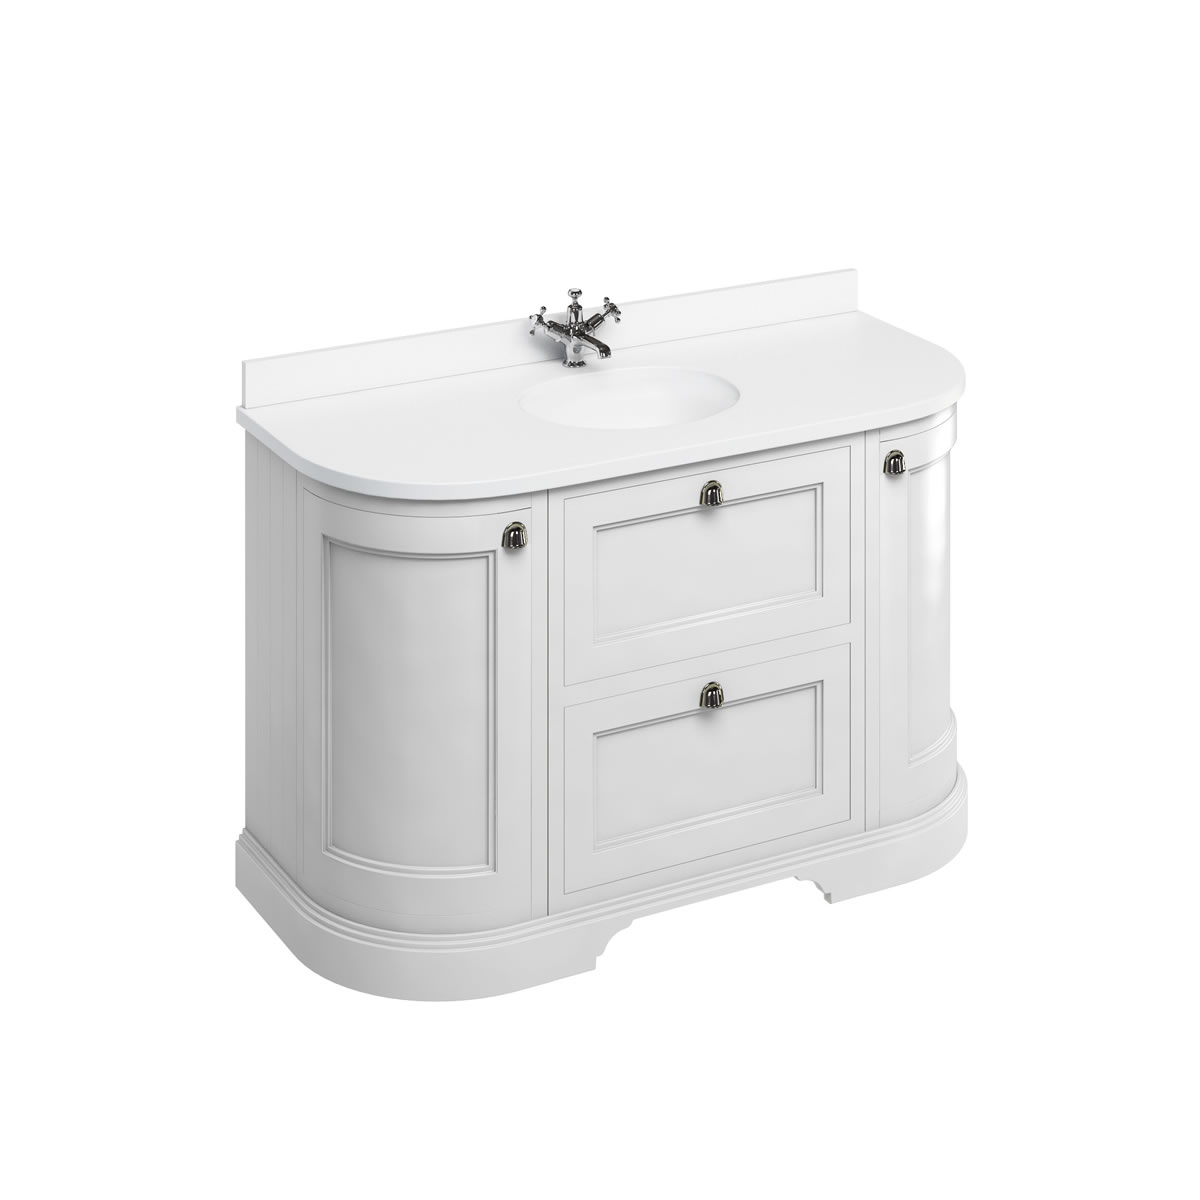 Freestanding 134 Curved Vanity Unit with drawers - Matt White and Minerva white worktop with integrated white basin